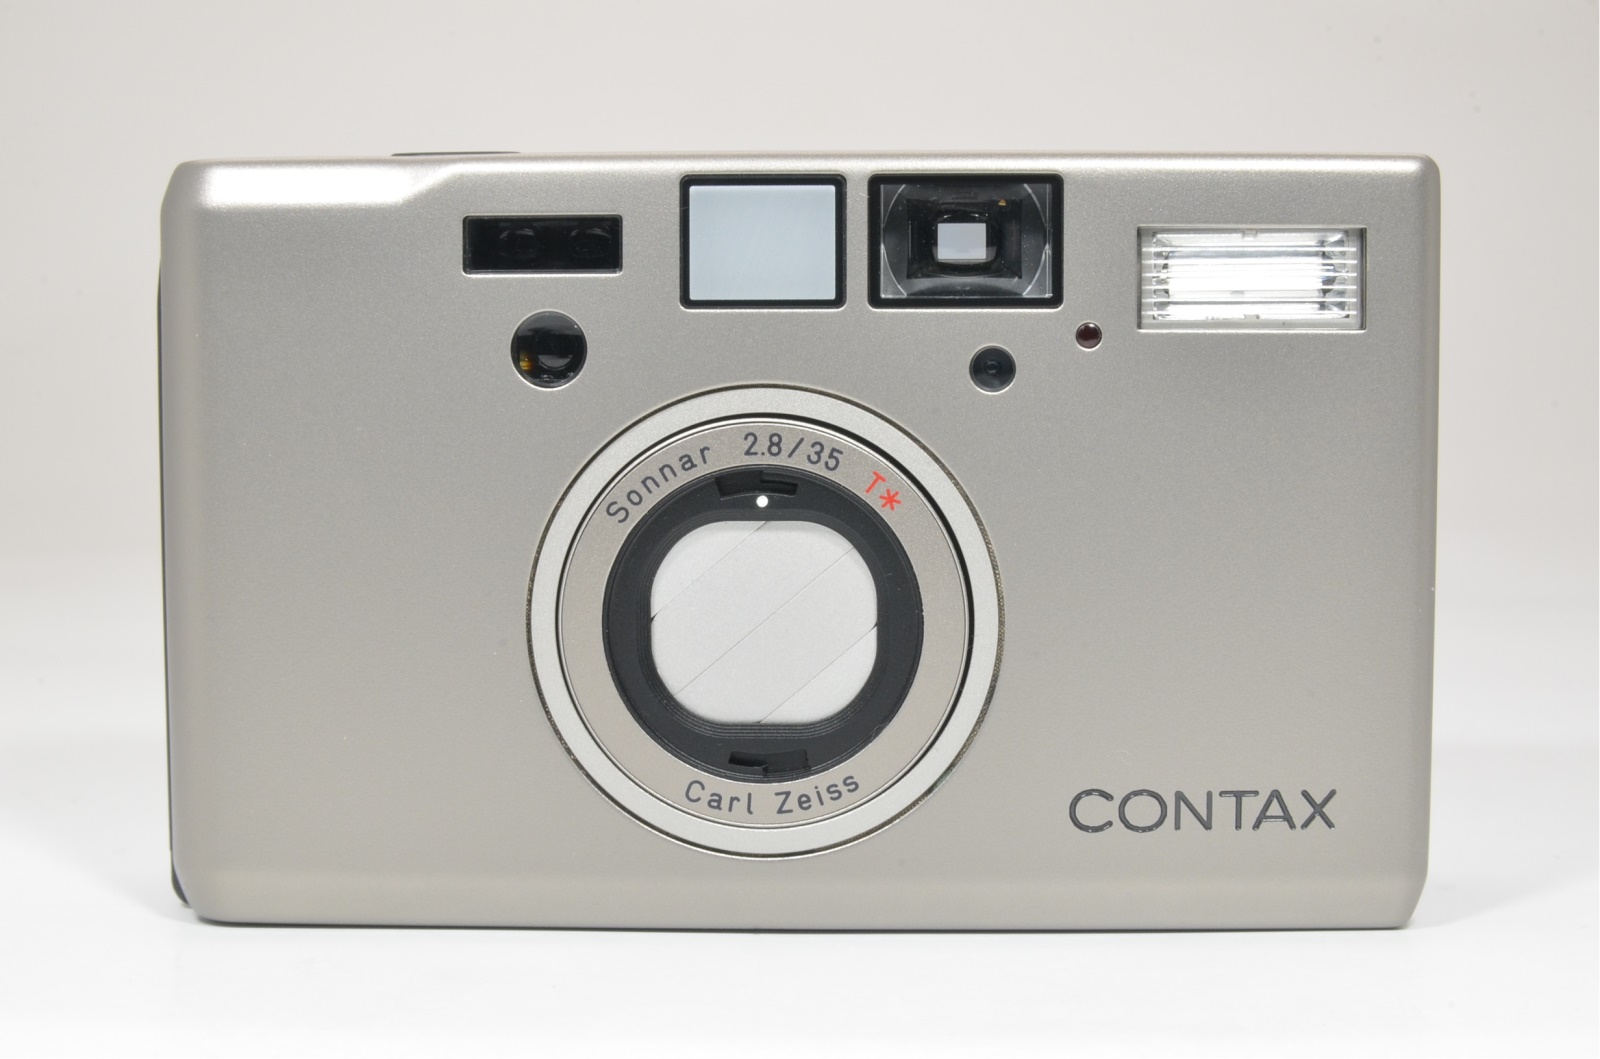 contax t3 titanium silver double teeth 35mm camera #a1345 shooting tested